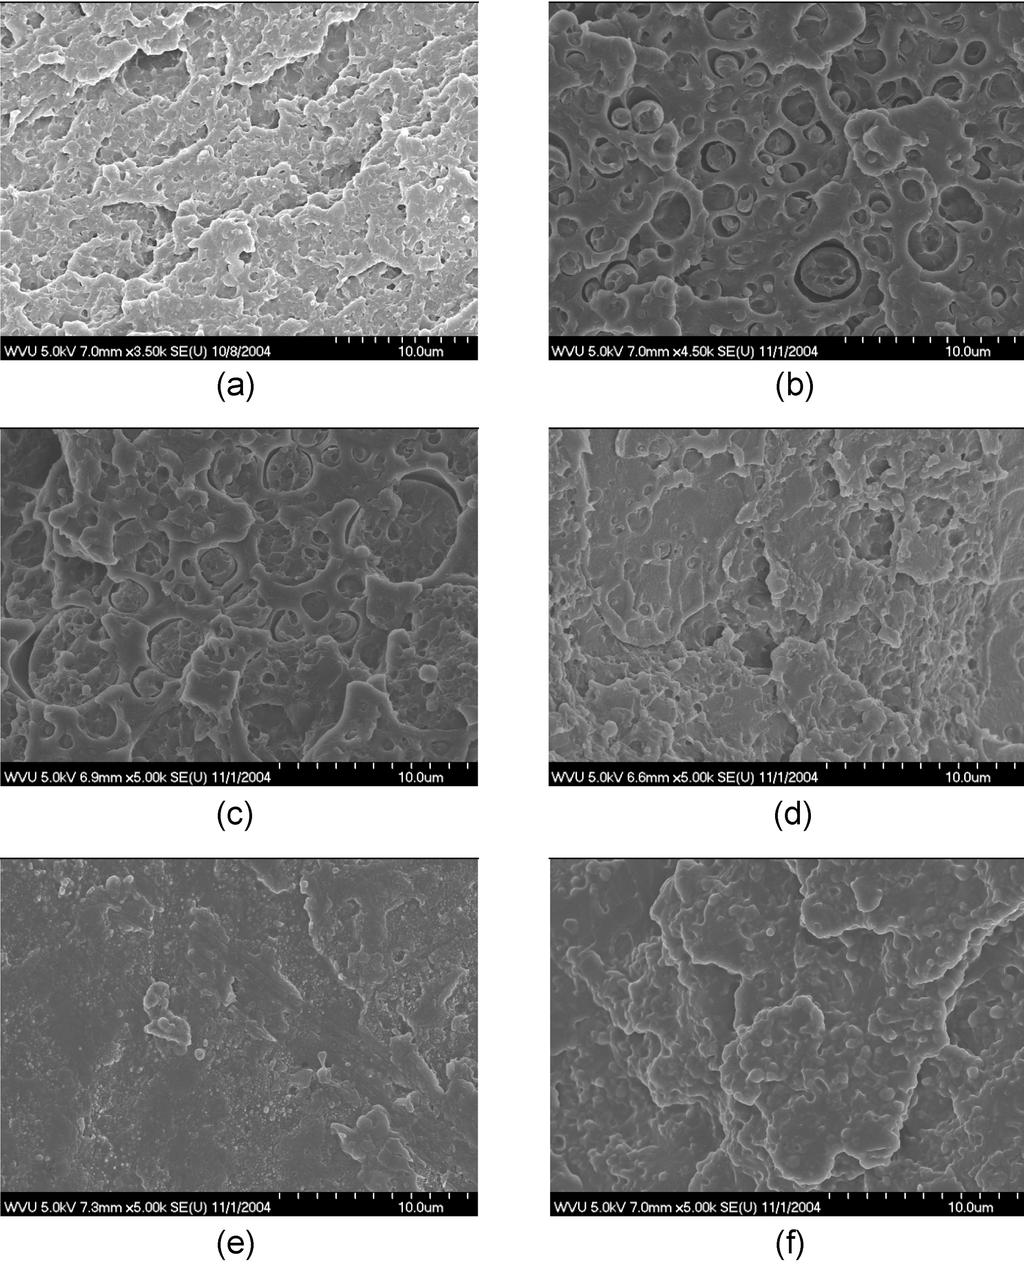 M.M.K. Khan, R.F. Liang, R.K. Gupta and S. Agarwal Fig. 2. Scanning electron micrographs of fracture surfaces of PC/ABS blends: (a) ABS (b) 15% ABS (c) 30% ABS (d) 50% ABS (e) 70% ABS and (f) 85% ABS.